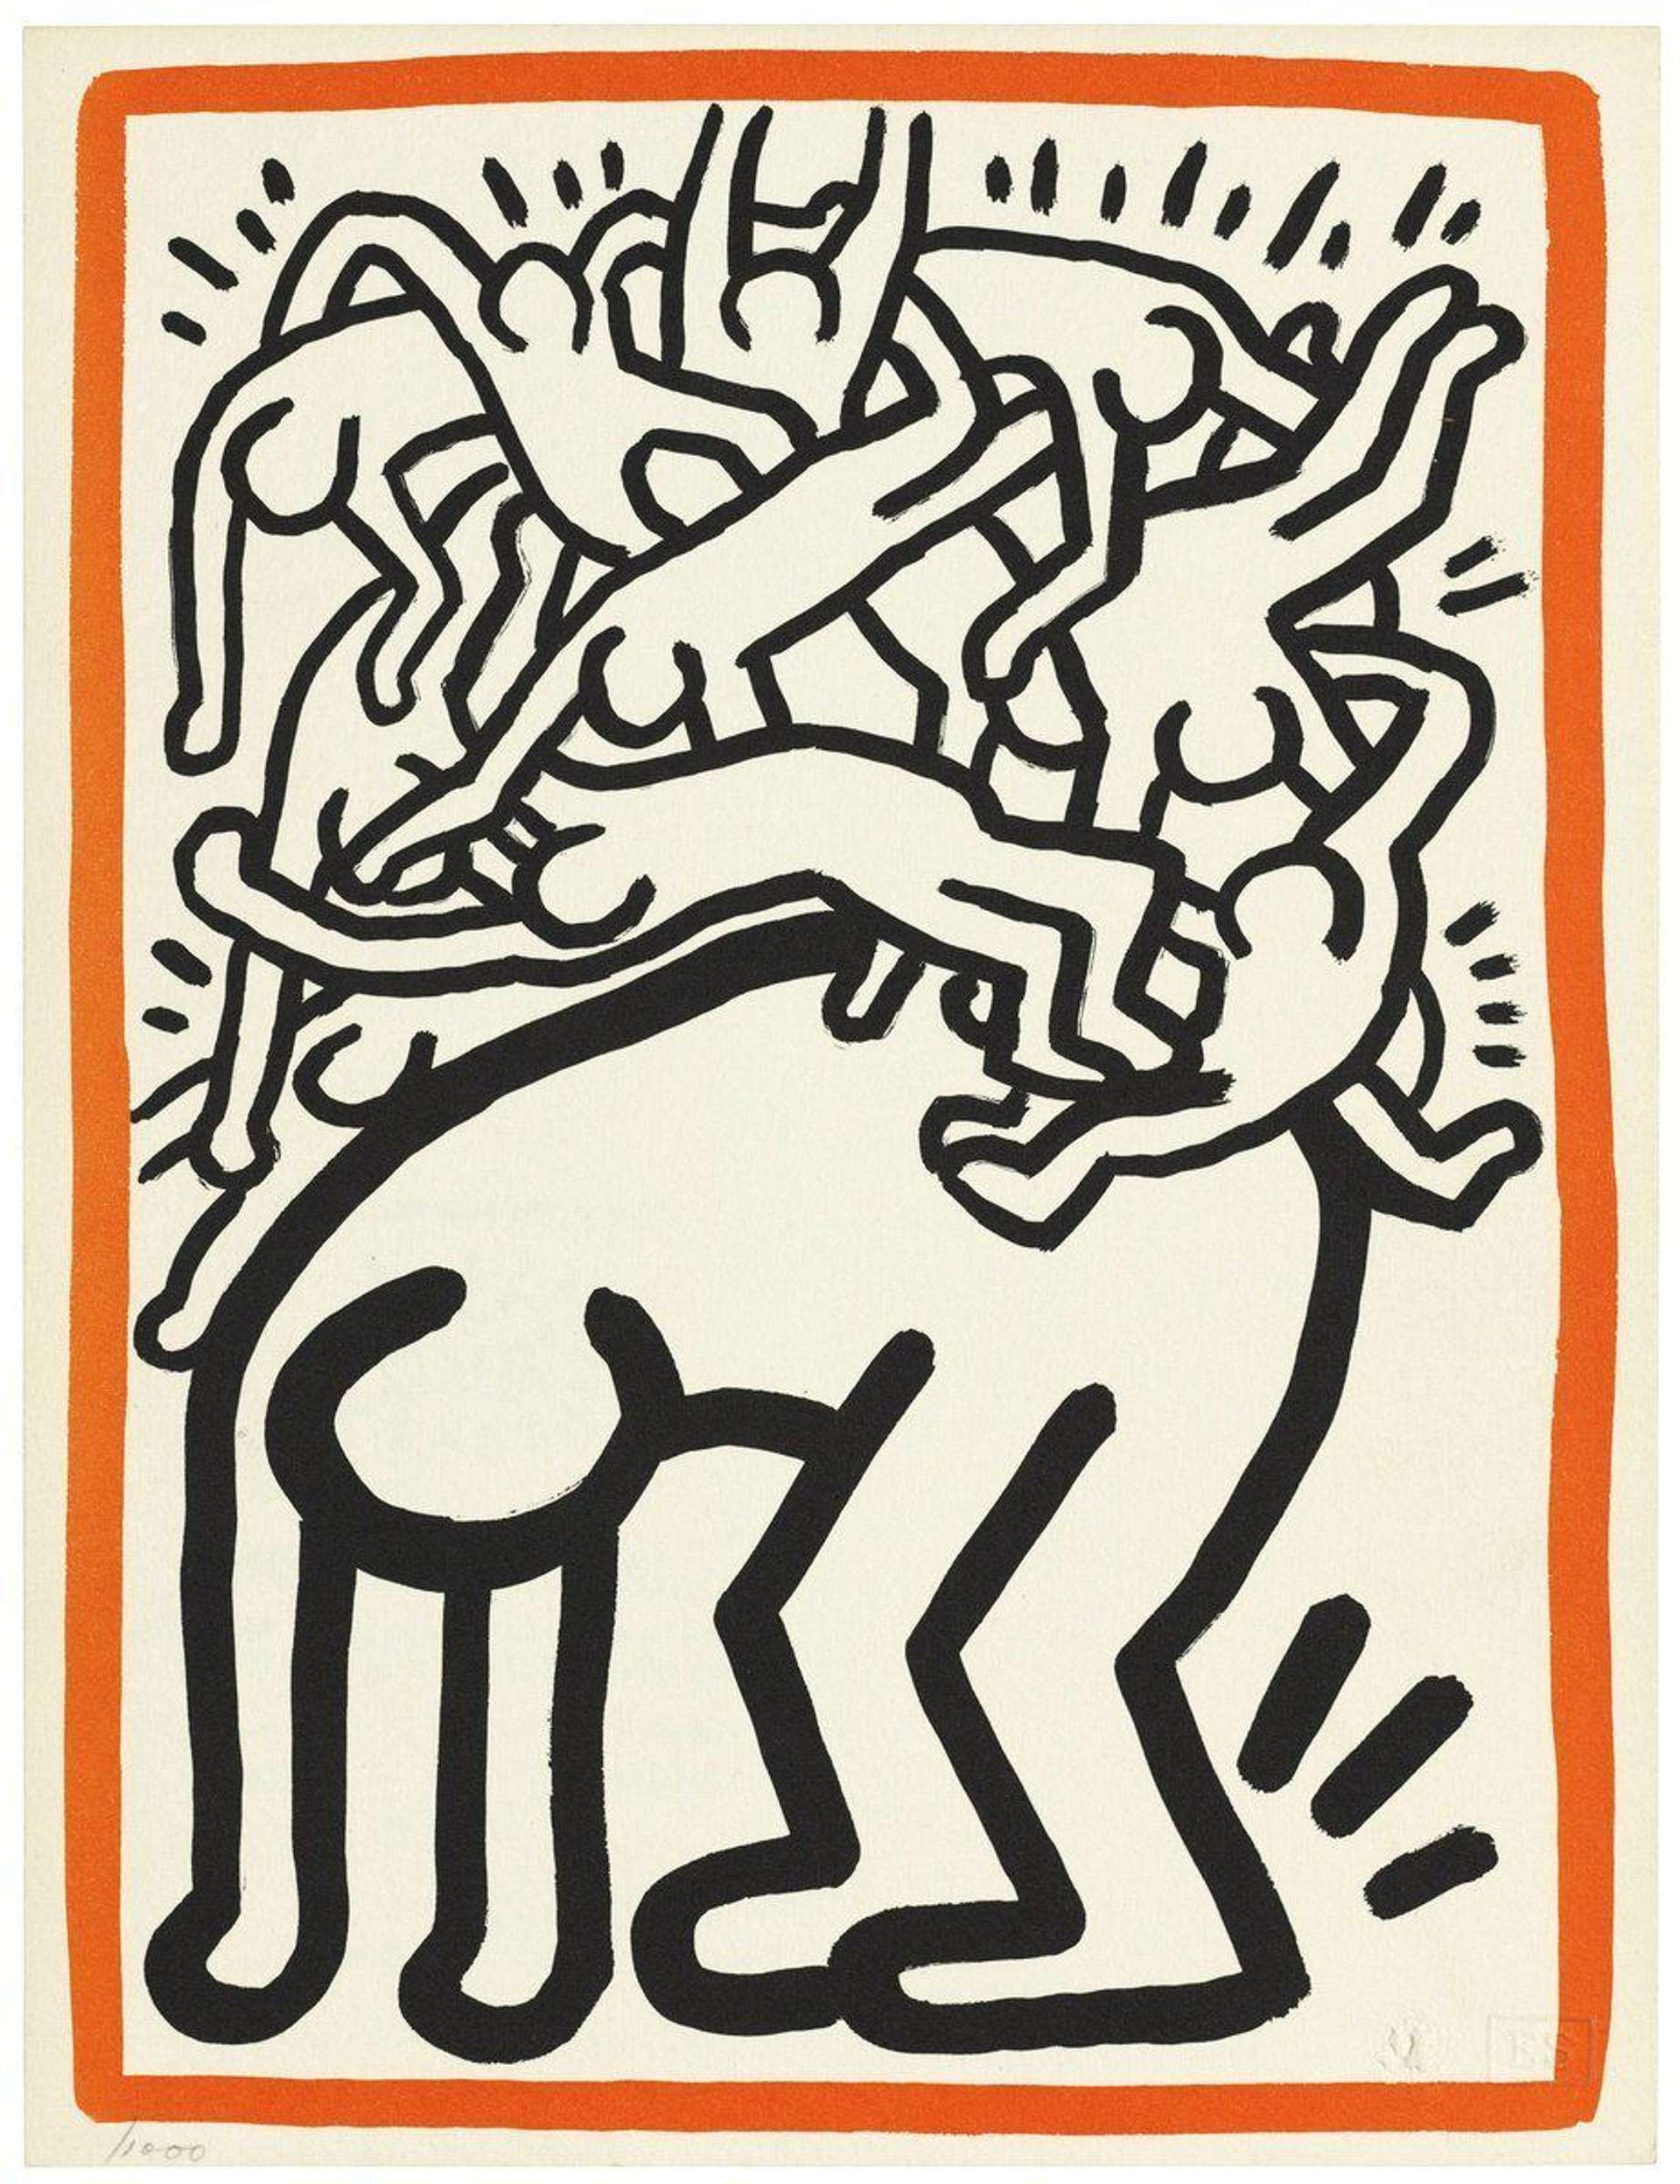 Fight Aids Worldwide - Signed Print by Keith Haring 1990 - MyArtBroker